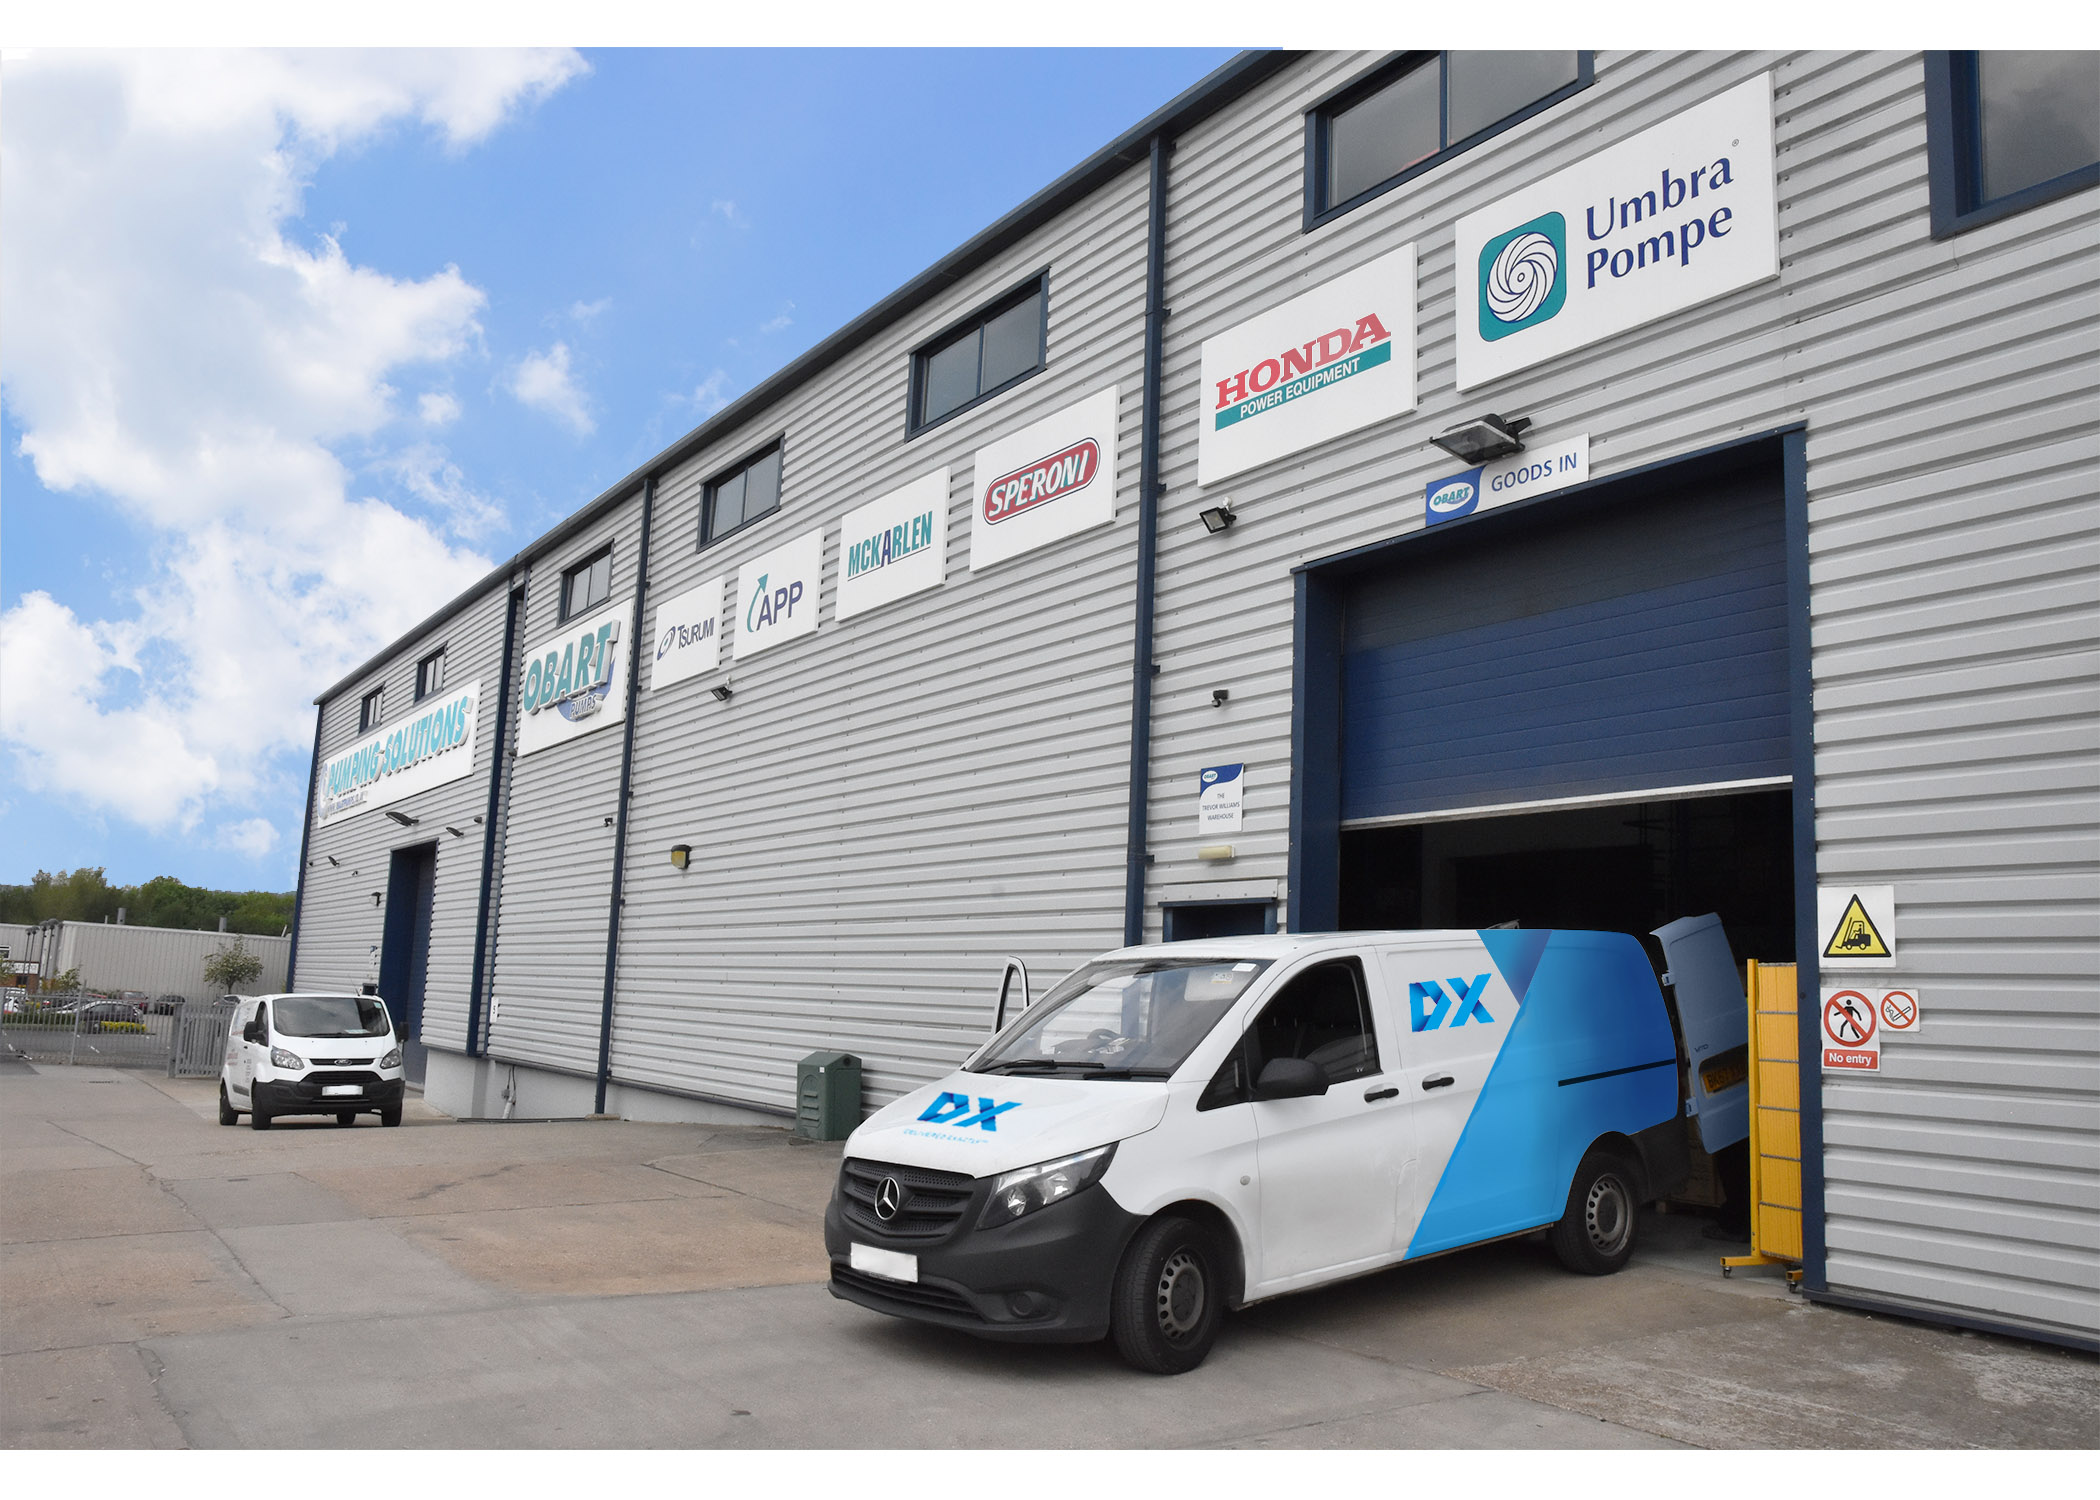 Obart Pumps has awarded its main delivery contract to the DX Group.